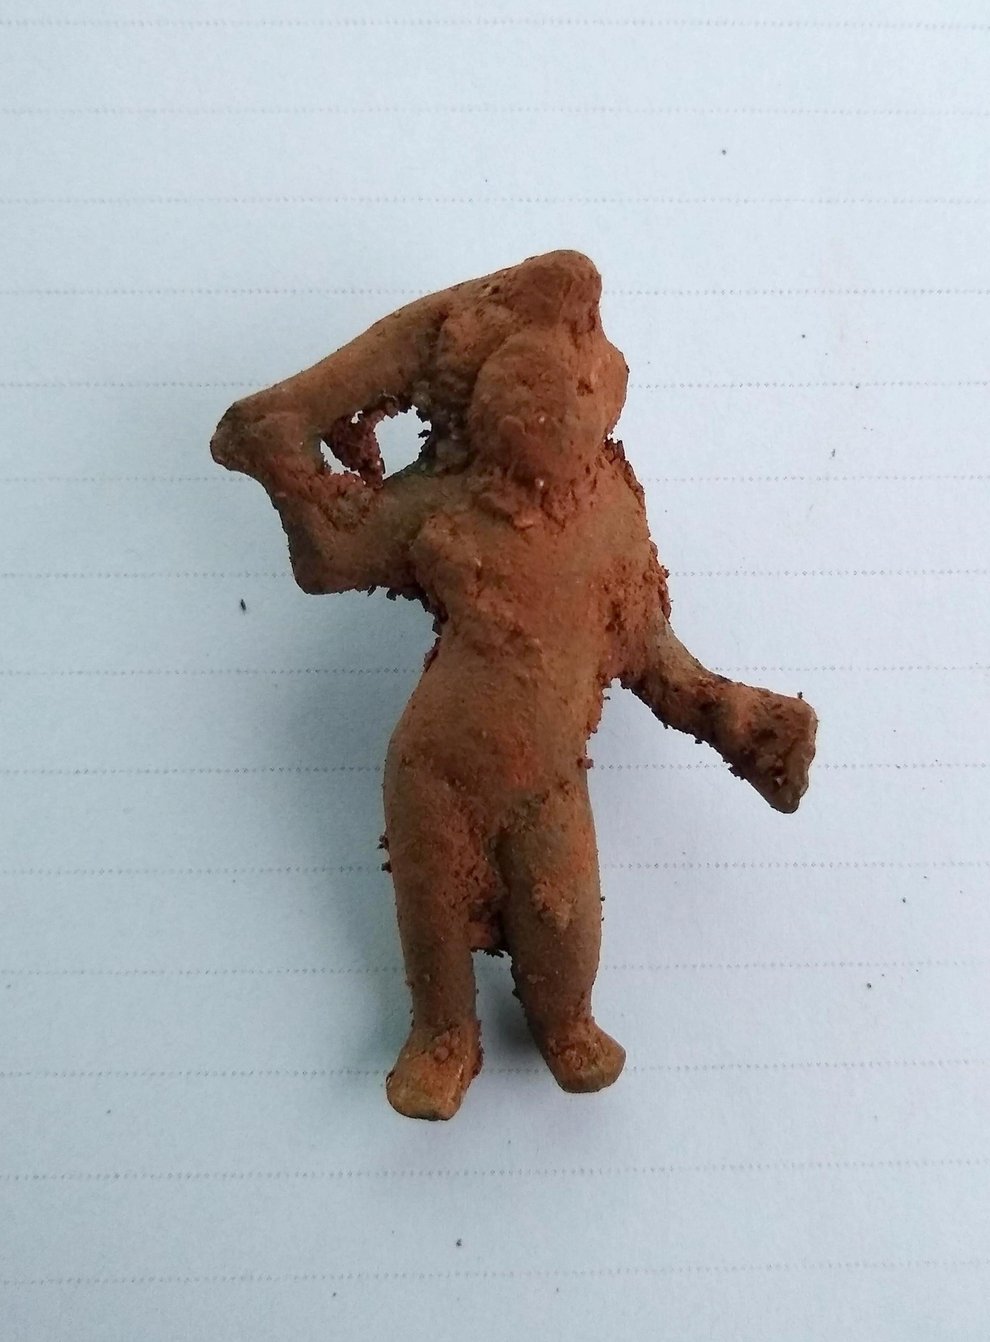 A 2,000-year-old Cupid figurine found among Roman artefacts on a stretch of the new A417 Missing Link route in Gloucestershire